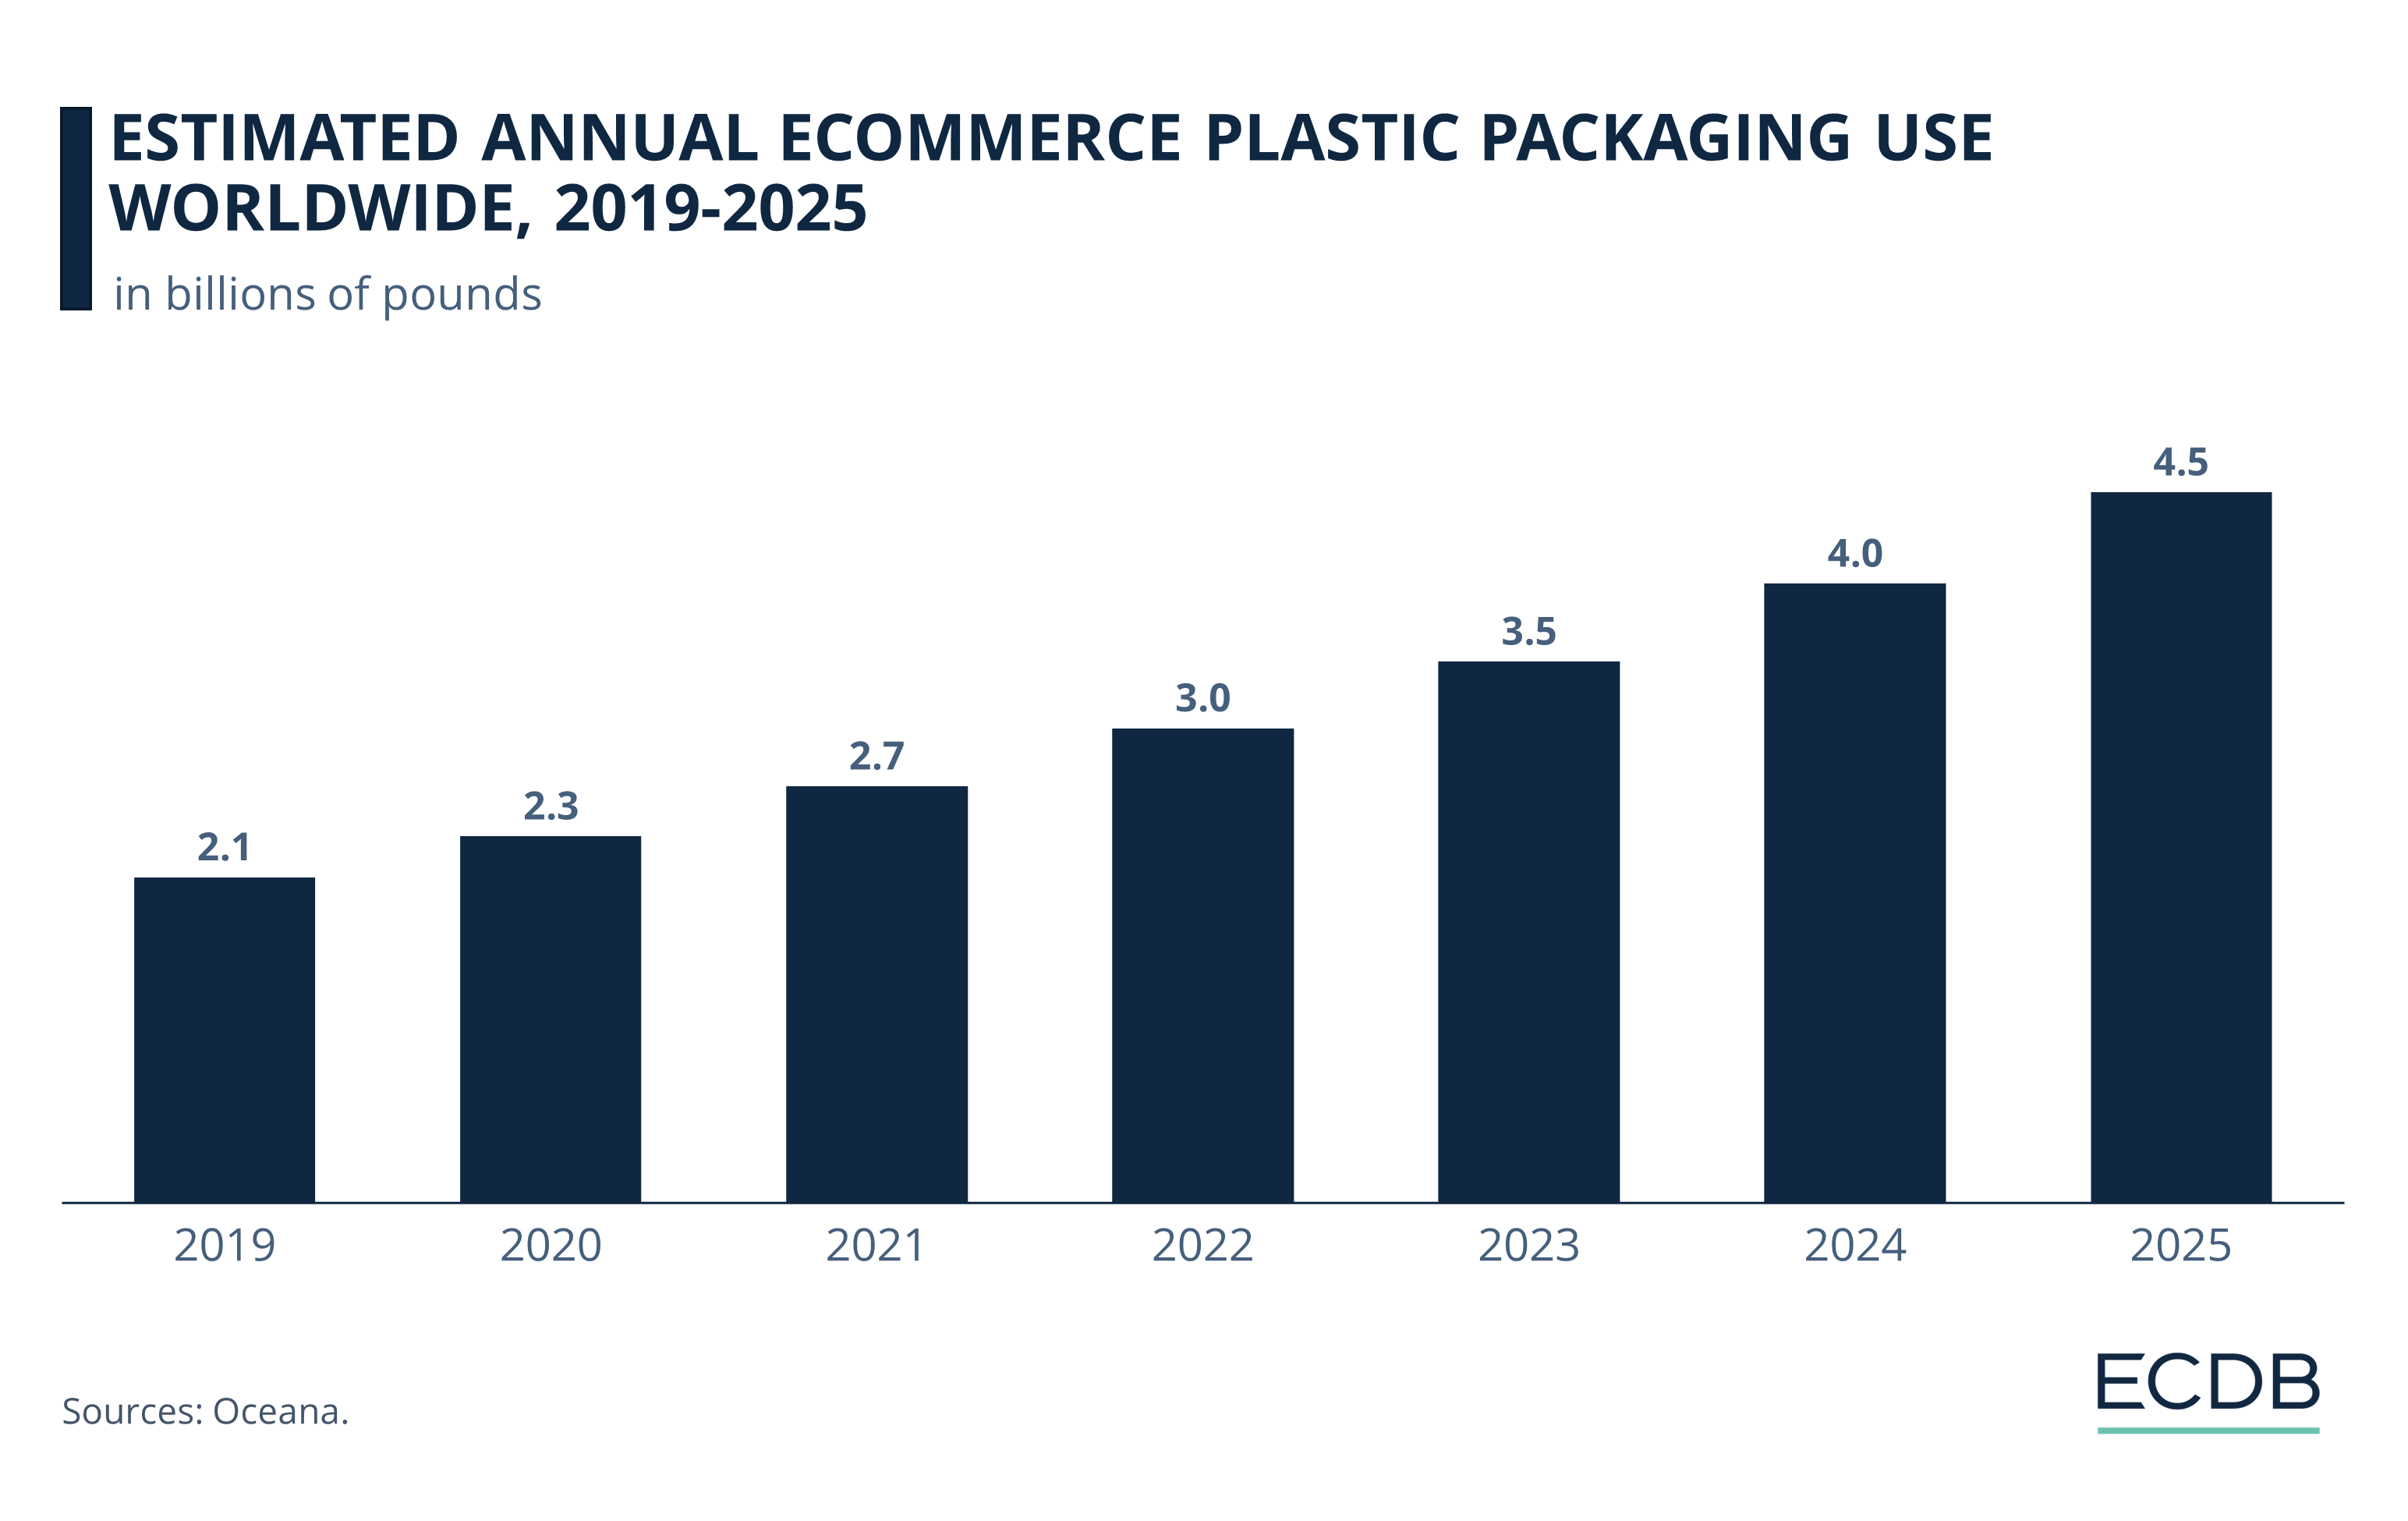 Estimated Annual eCommerce Plastic Packaging Use Worldwide, 2019-2025